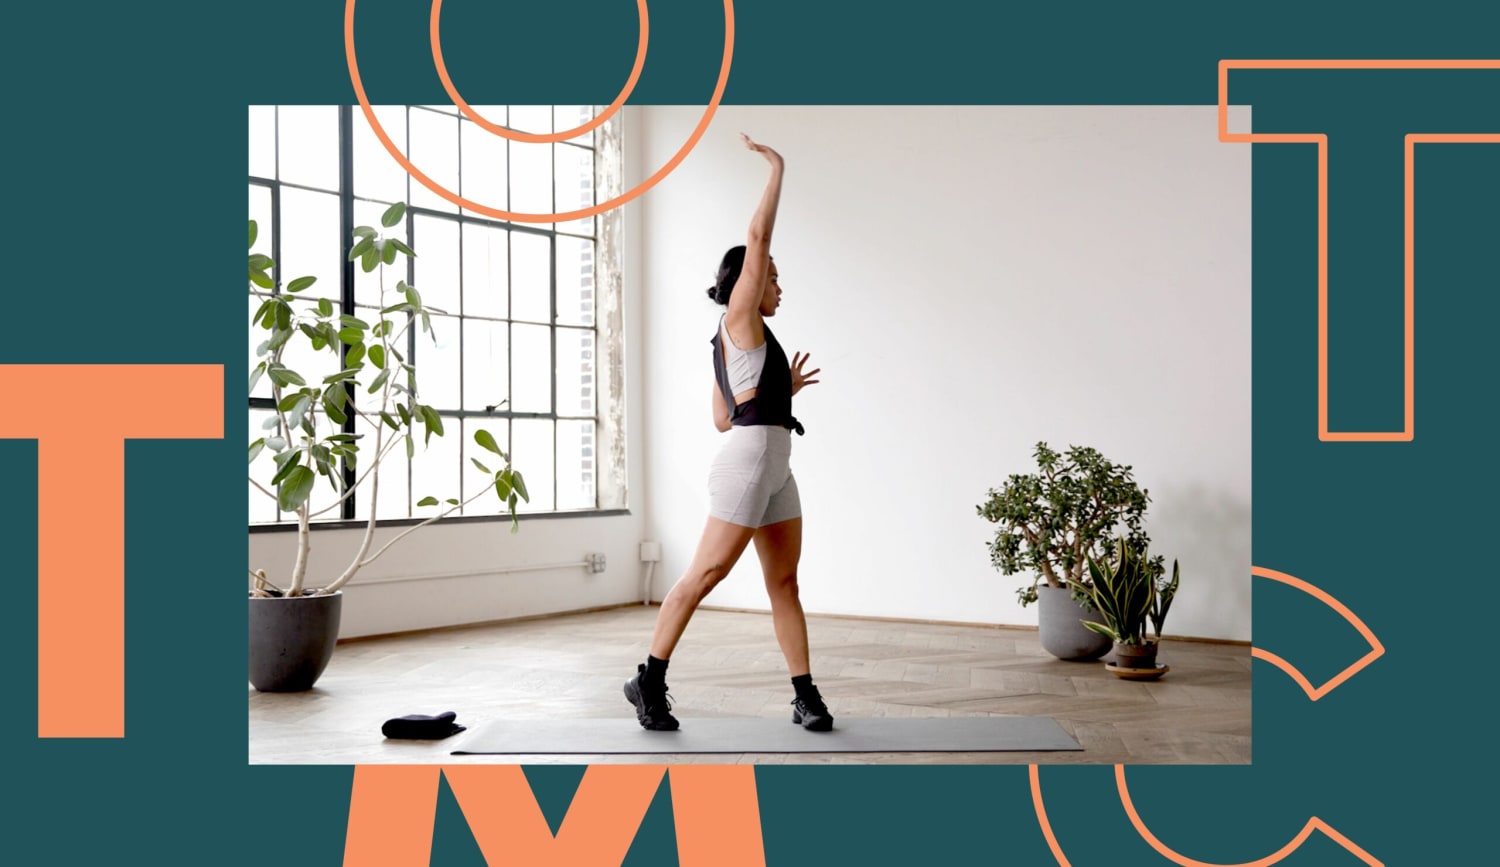 A Quick Upper Body Strength Workout That's Only 15 Minutes| Well+Good